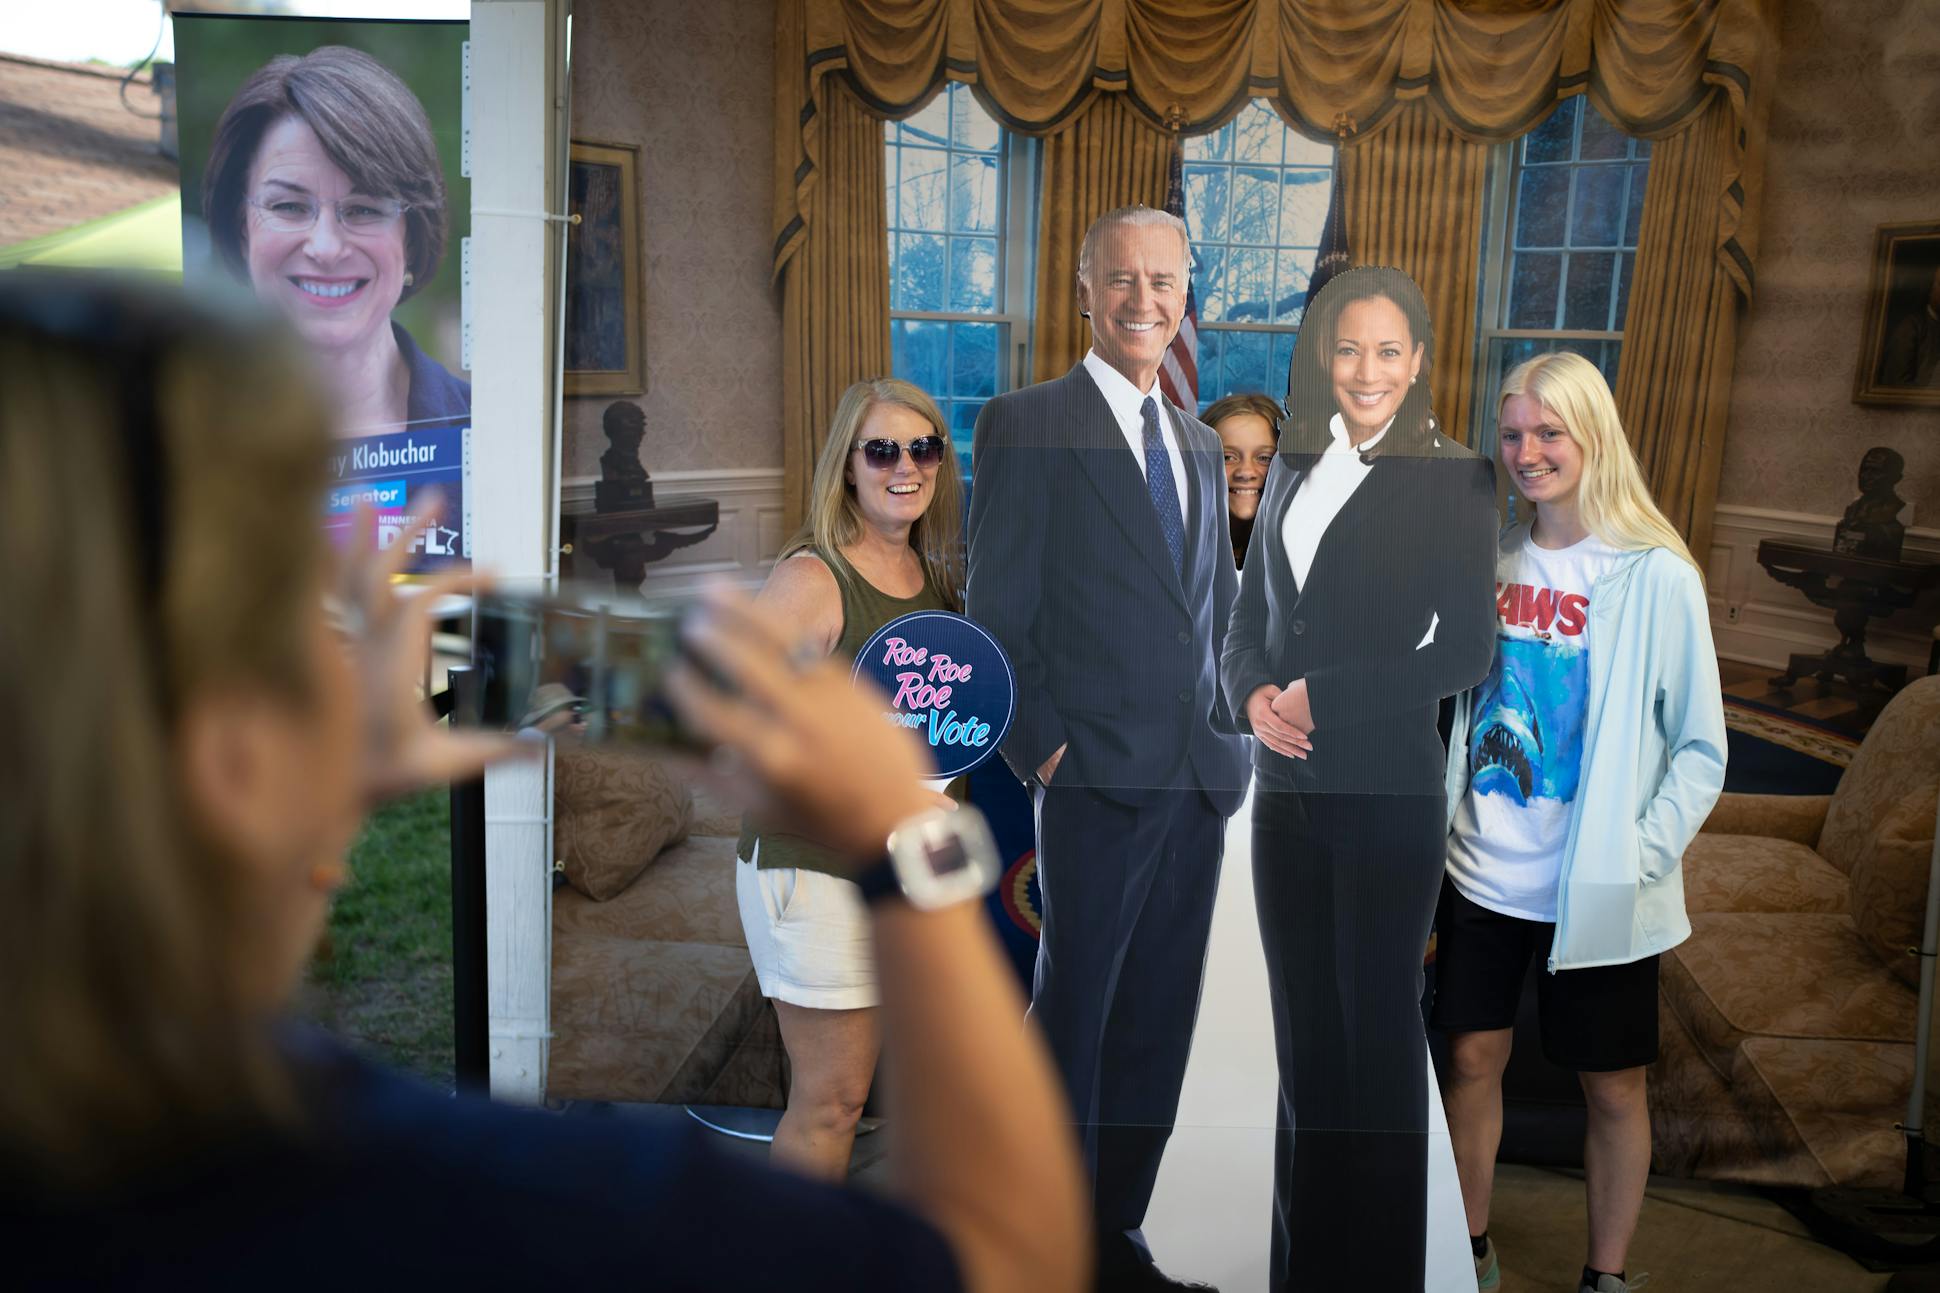 Volunteer Carol Grabowski took a photo of Pam Vandersluis of Buffalo, Minn., along with her two daughters Jordan, 12, and Lily, 15, at a Biden-Harris display at the DFL booth at the State Fair on Aug. 26.